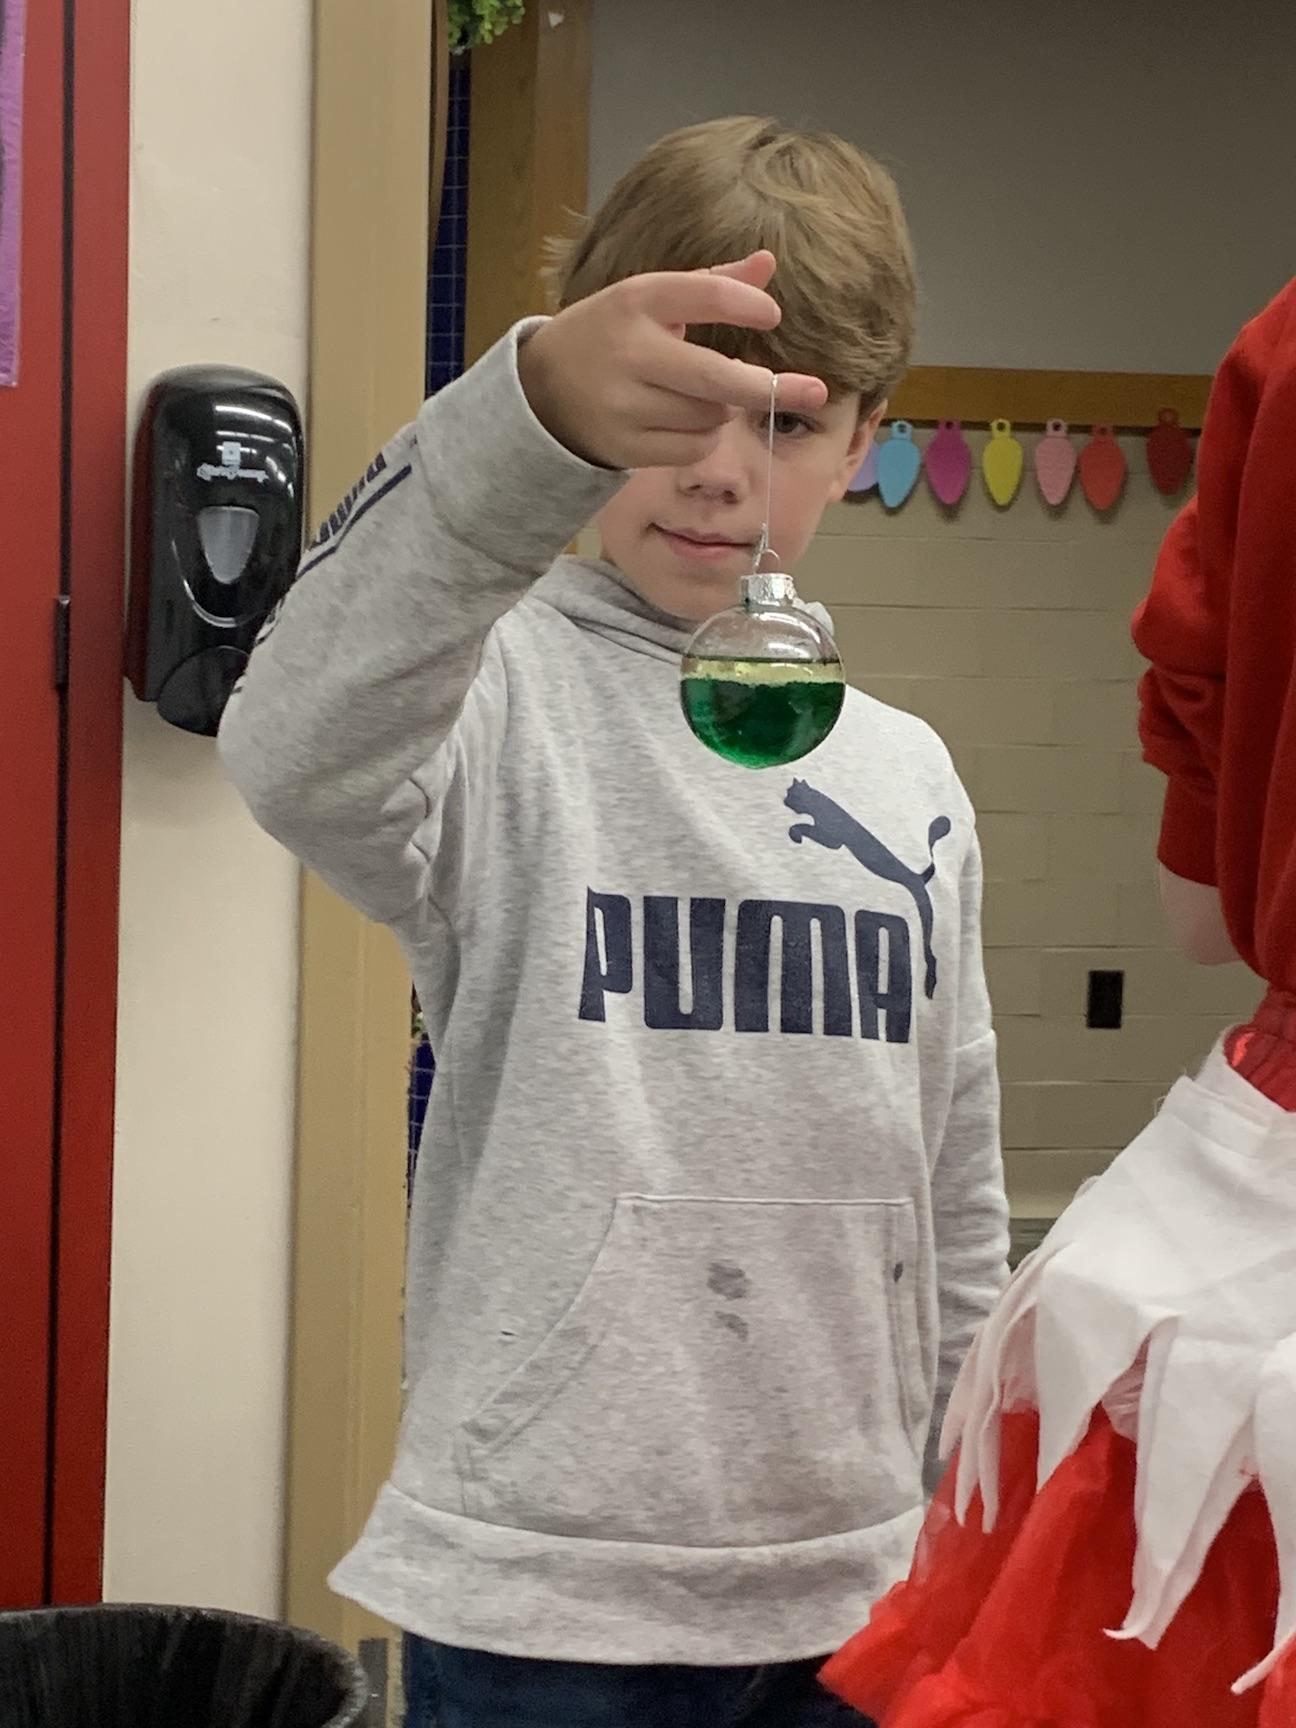 5th-grader Vincent Tomasic watches as his ornament bubbles